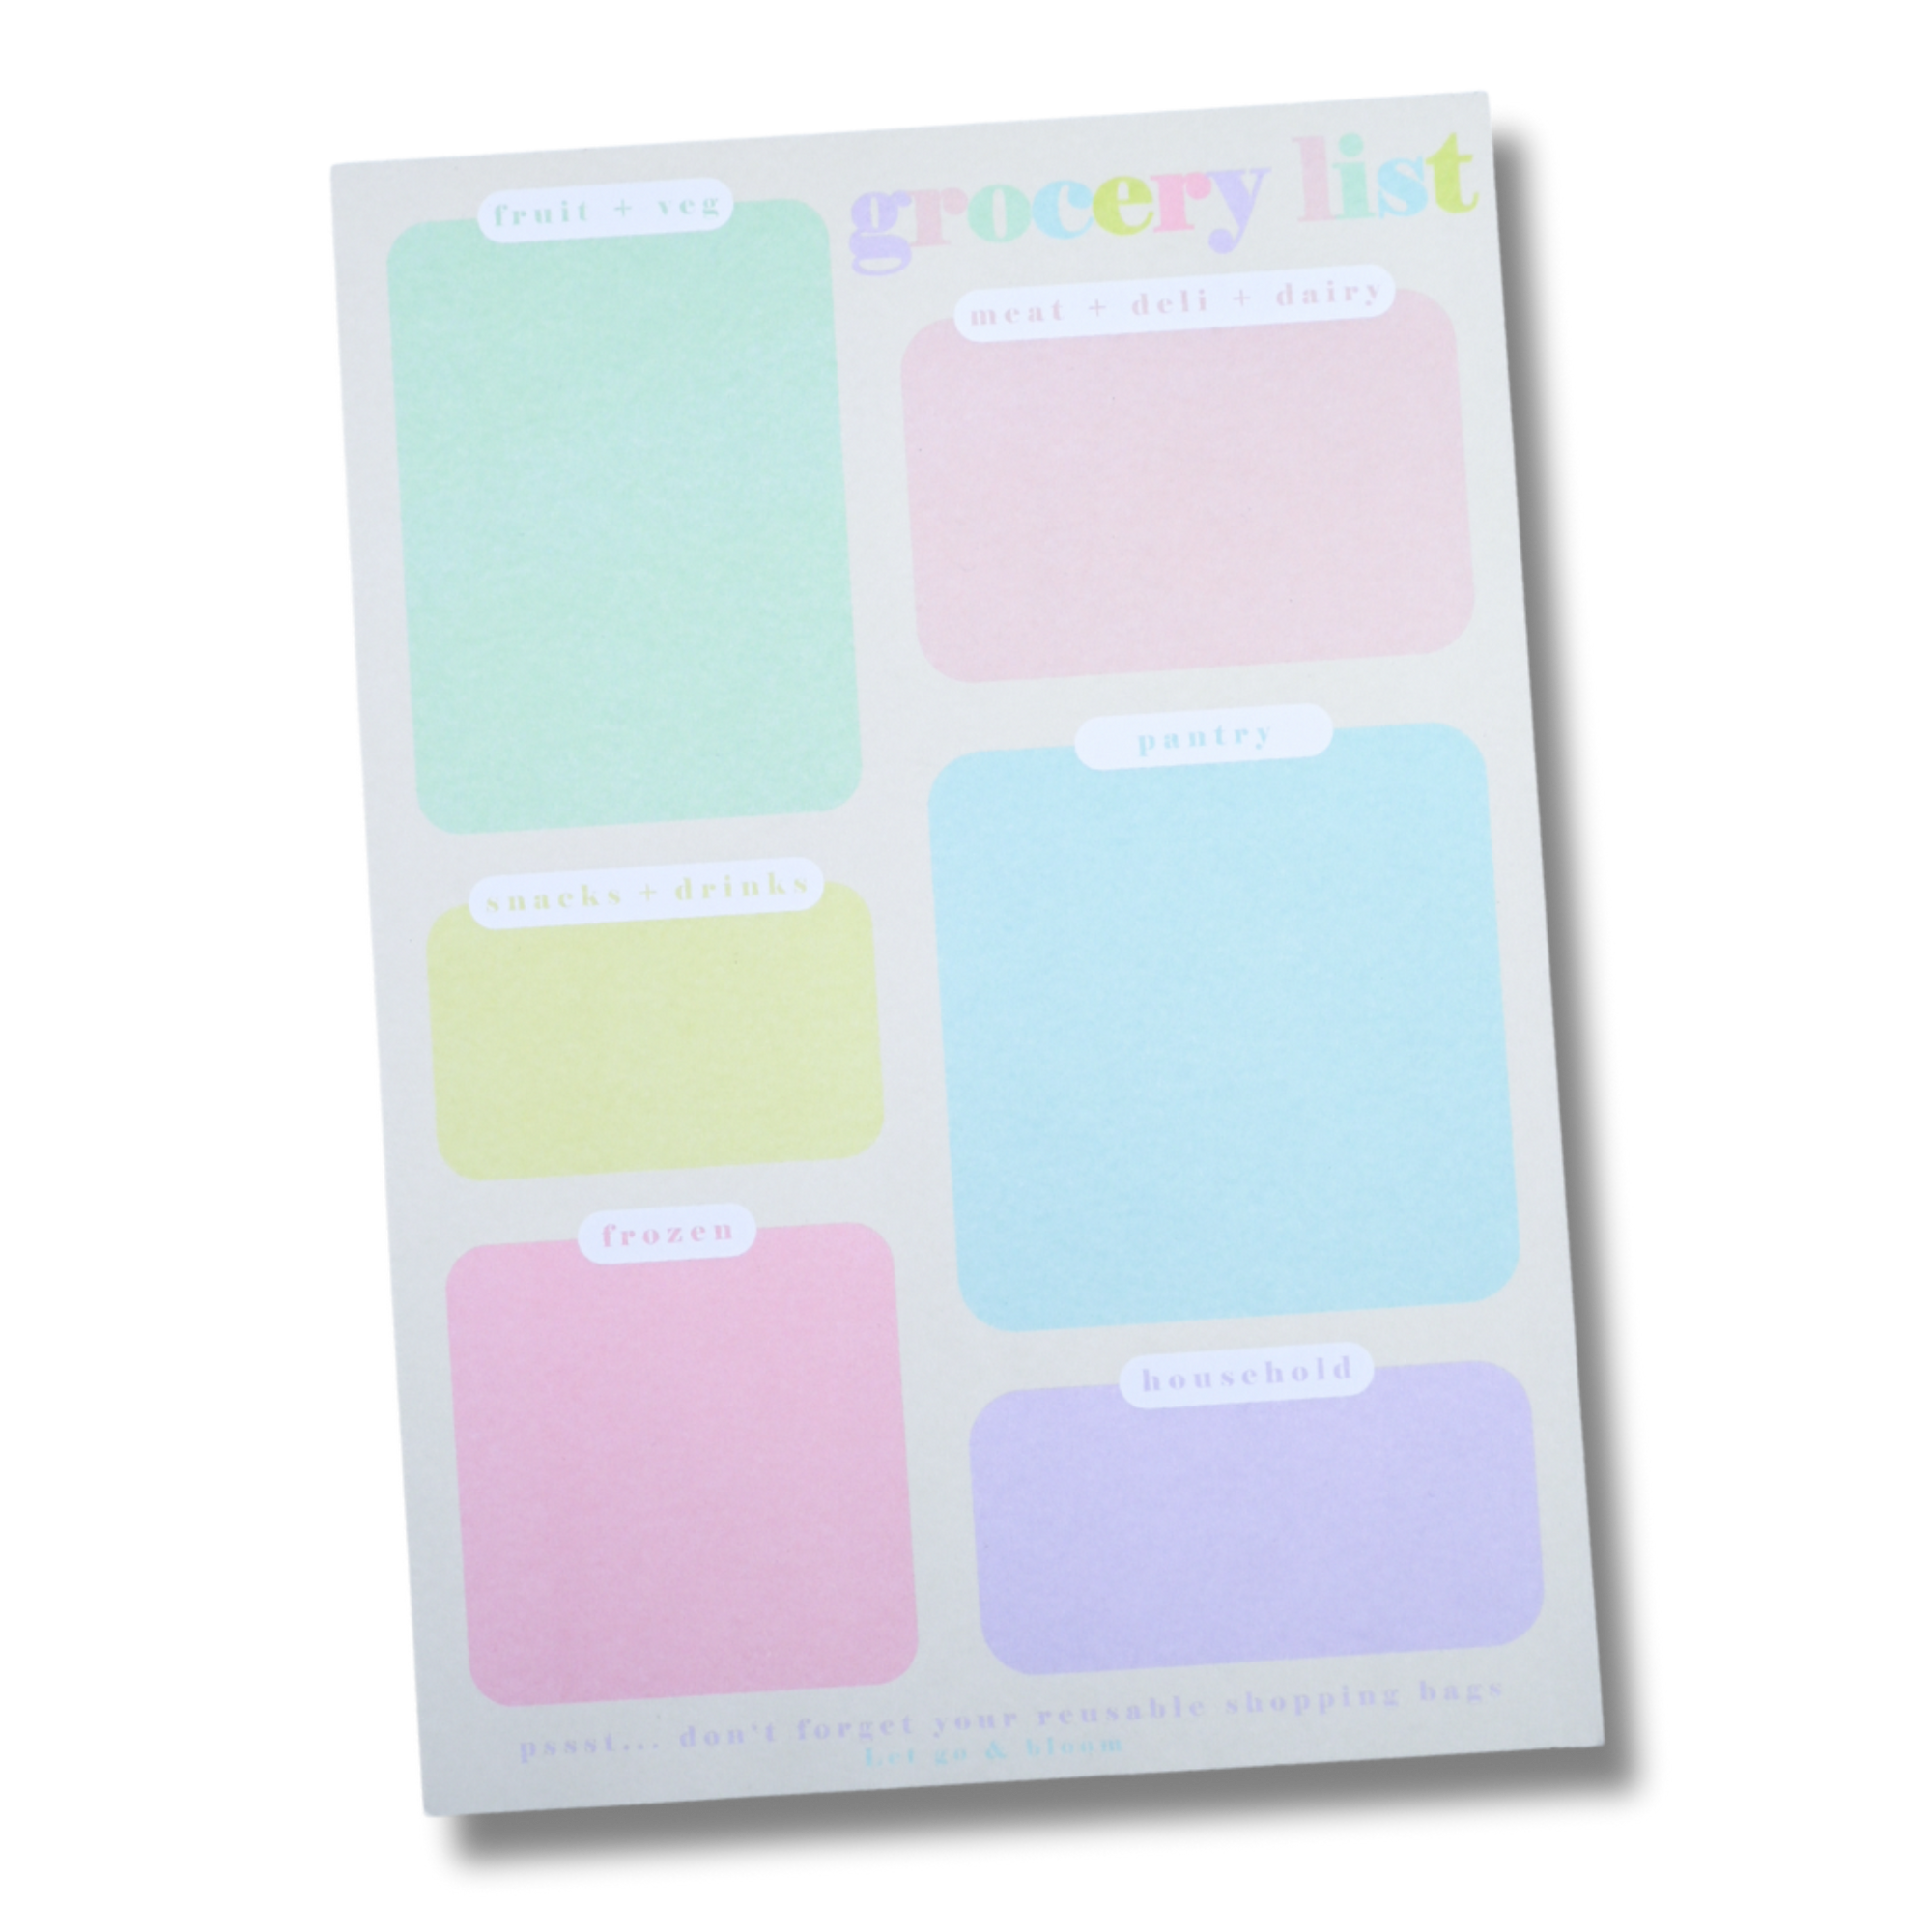 Colourful Grocery List Planner - A Lil Luxury